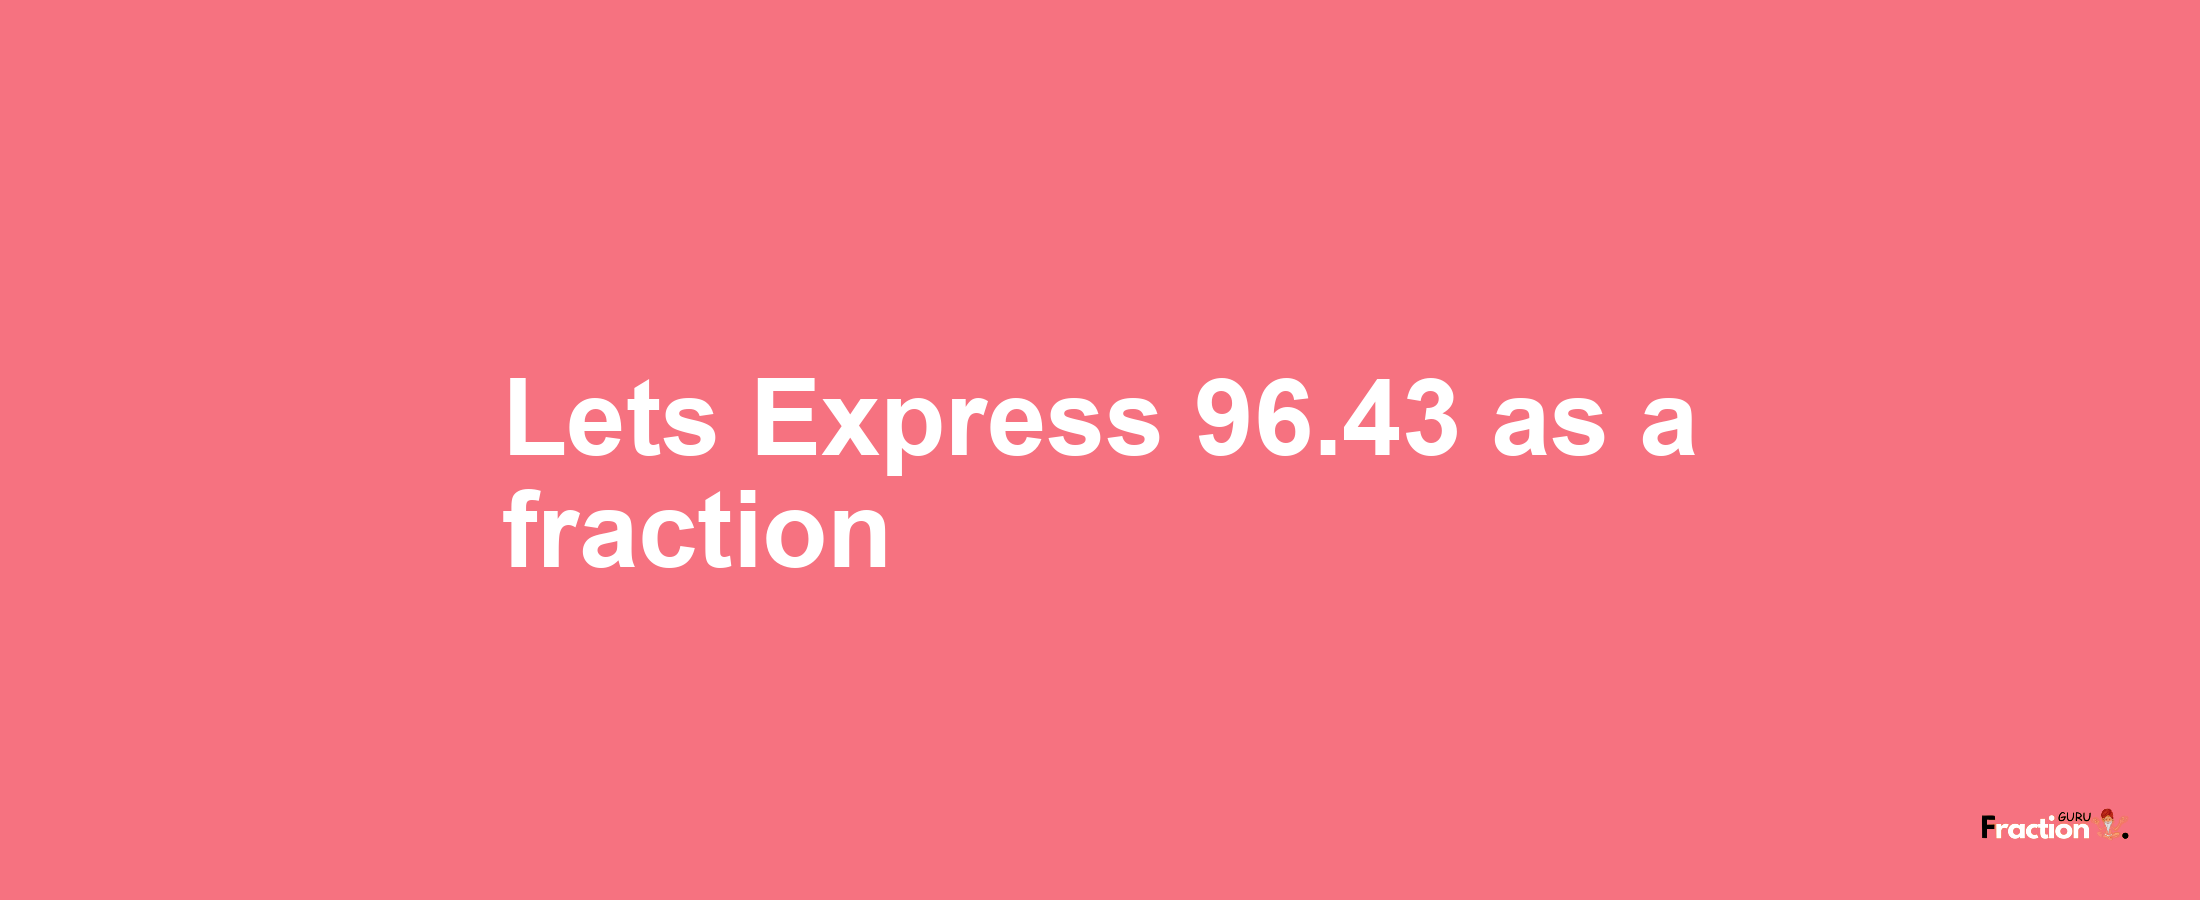 Lets Express 96.43 as afraction